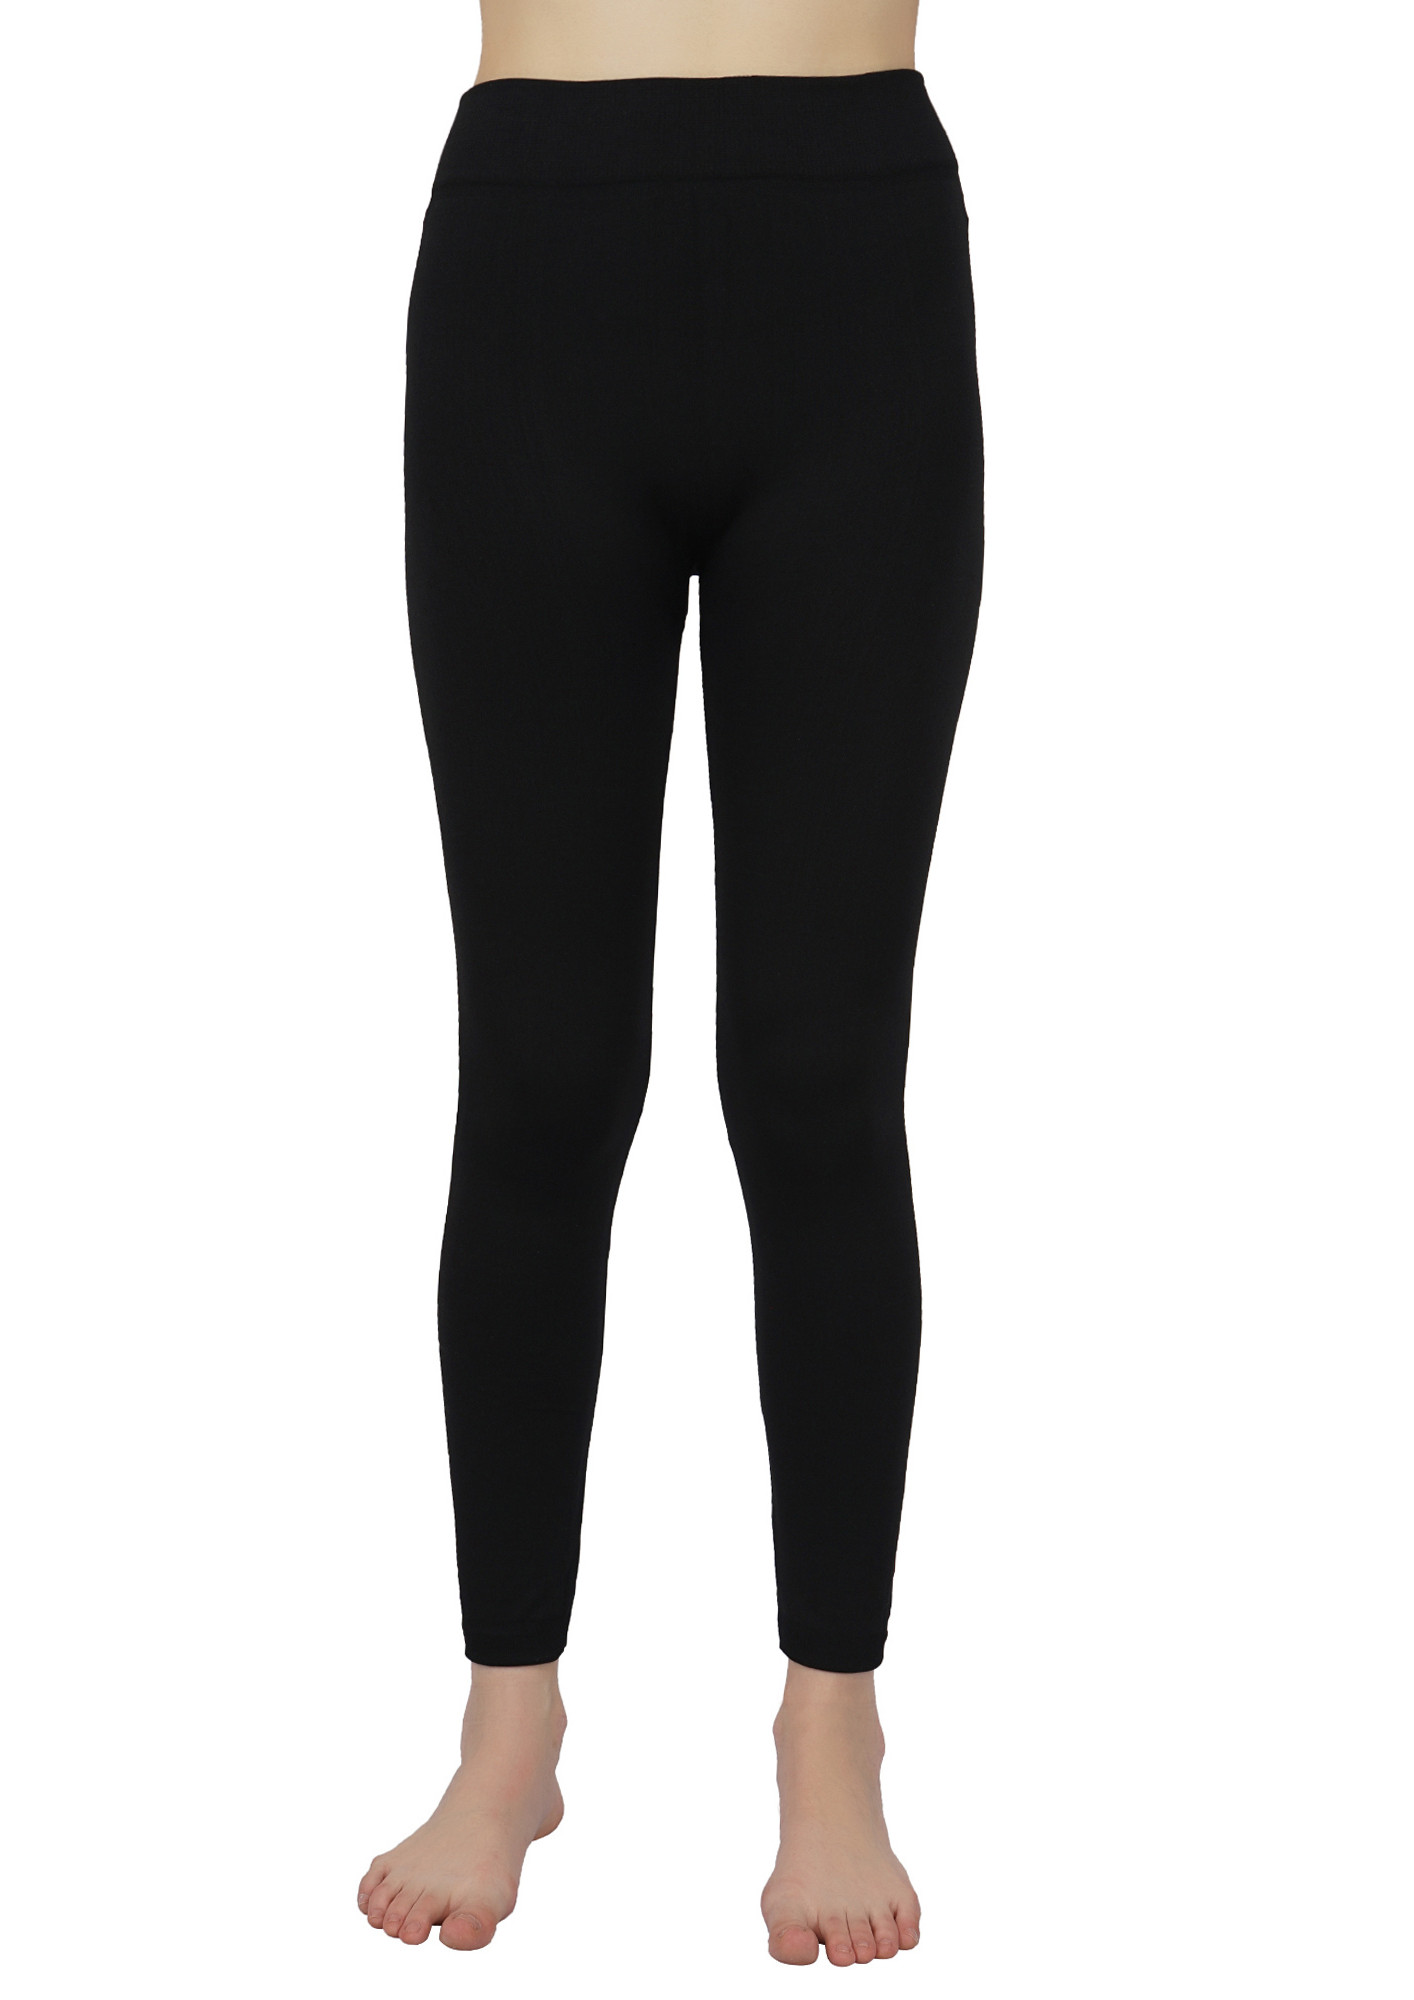 Find your perfect Winter leggings here